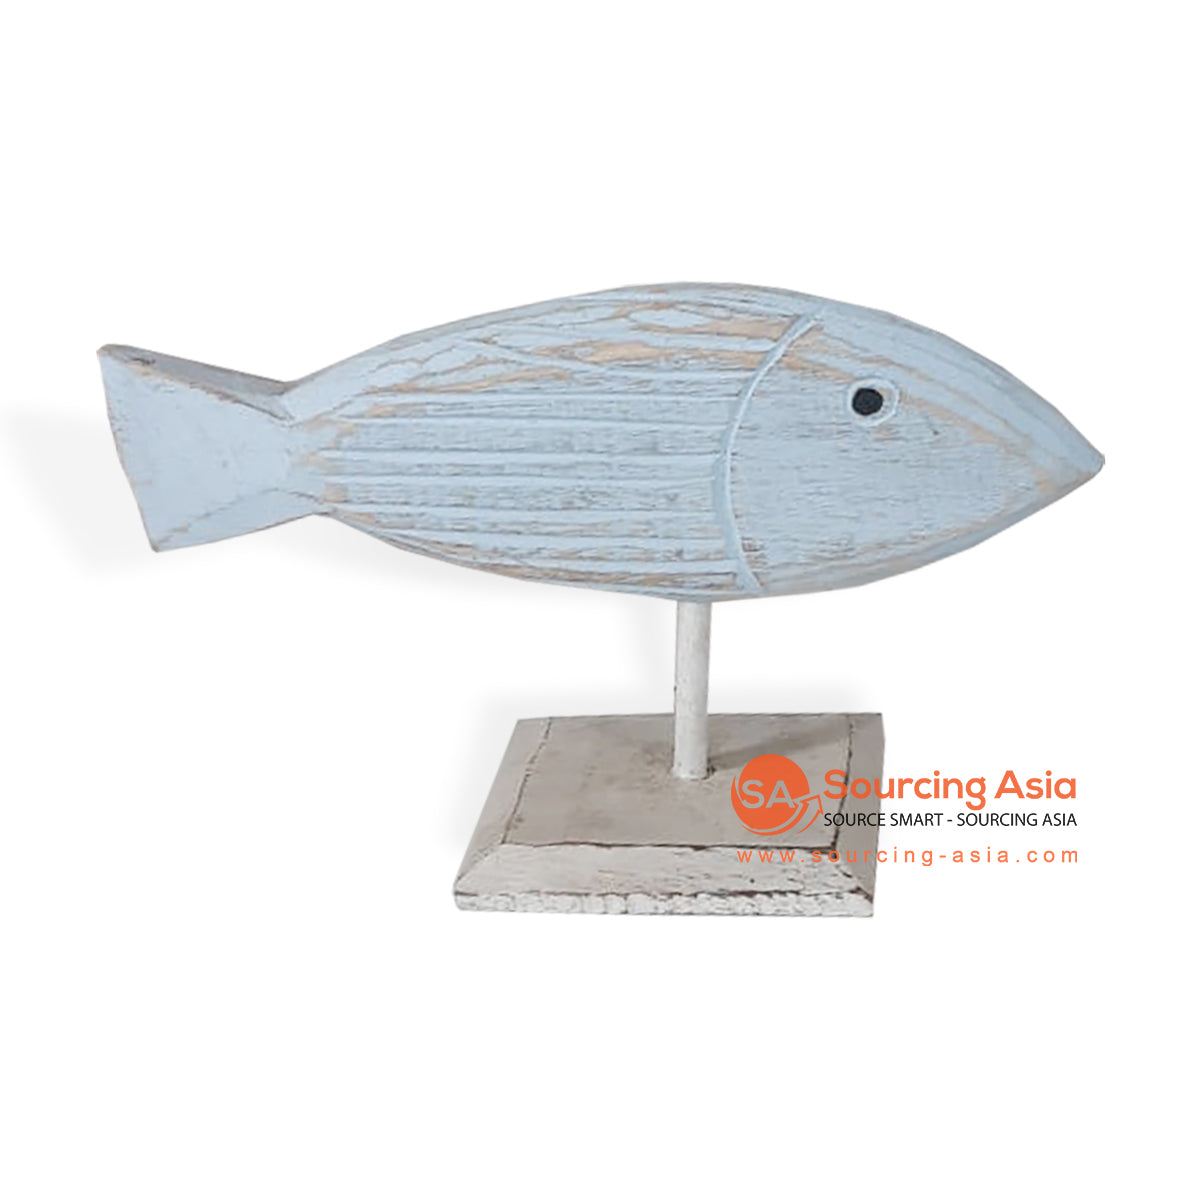 SKH006-1 BLUE AND WHITE WASH WOODEN FISH ON STAND DECORATION